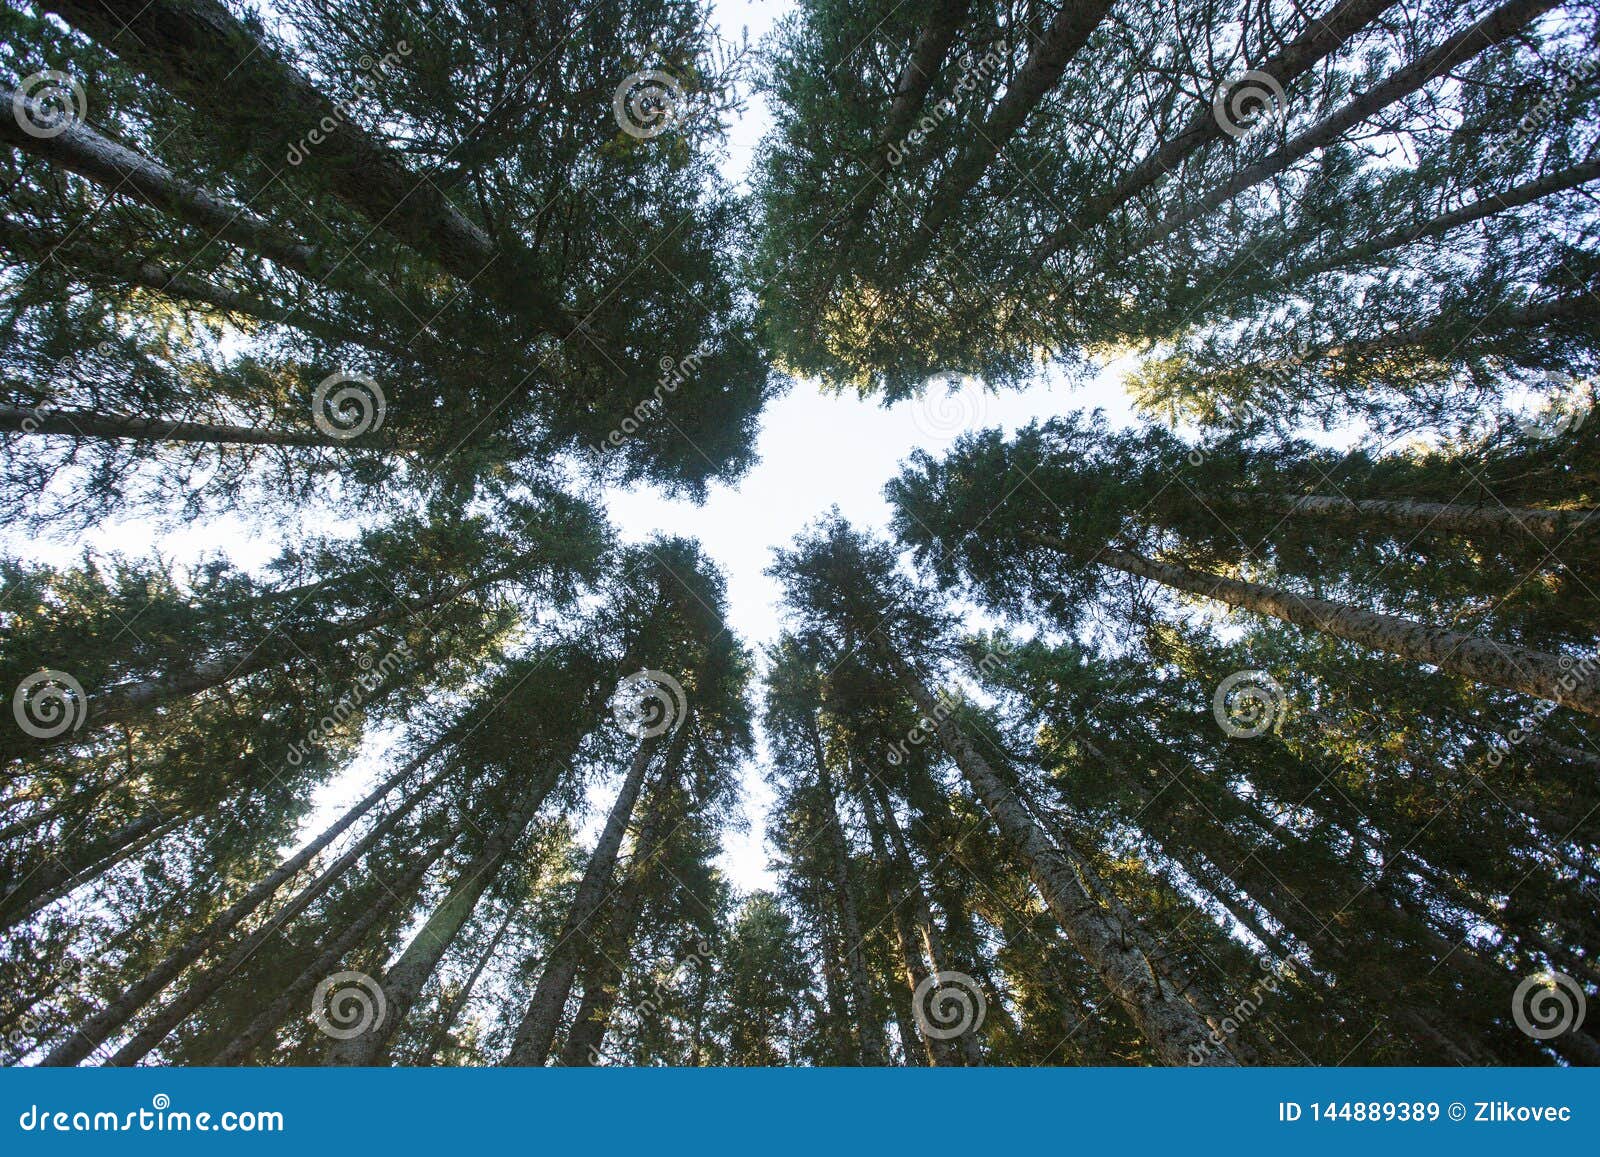 forest canopy of dense spruce forest against blue sky, unique view from below